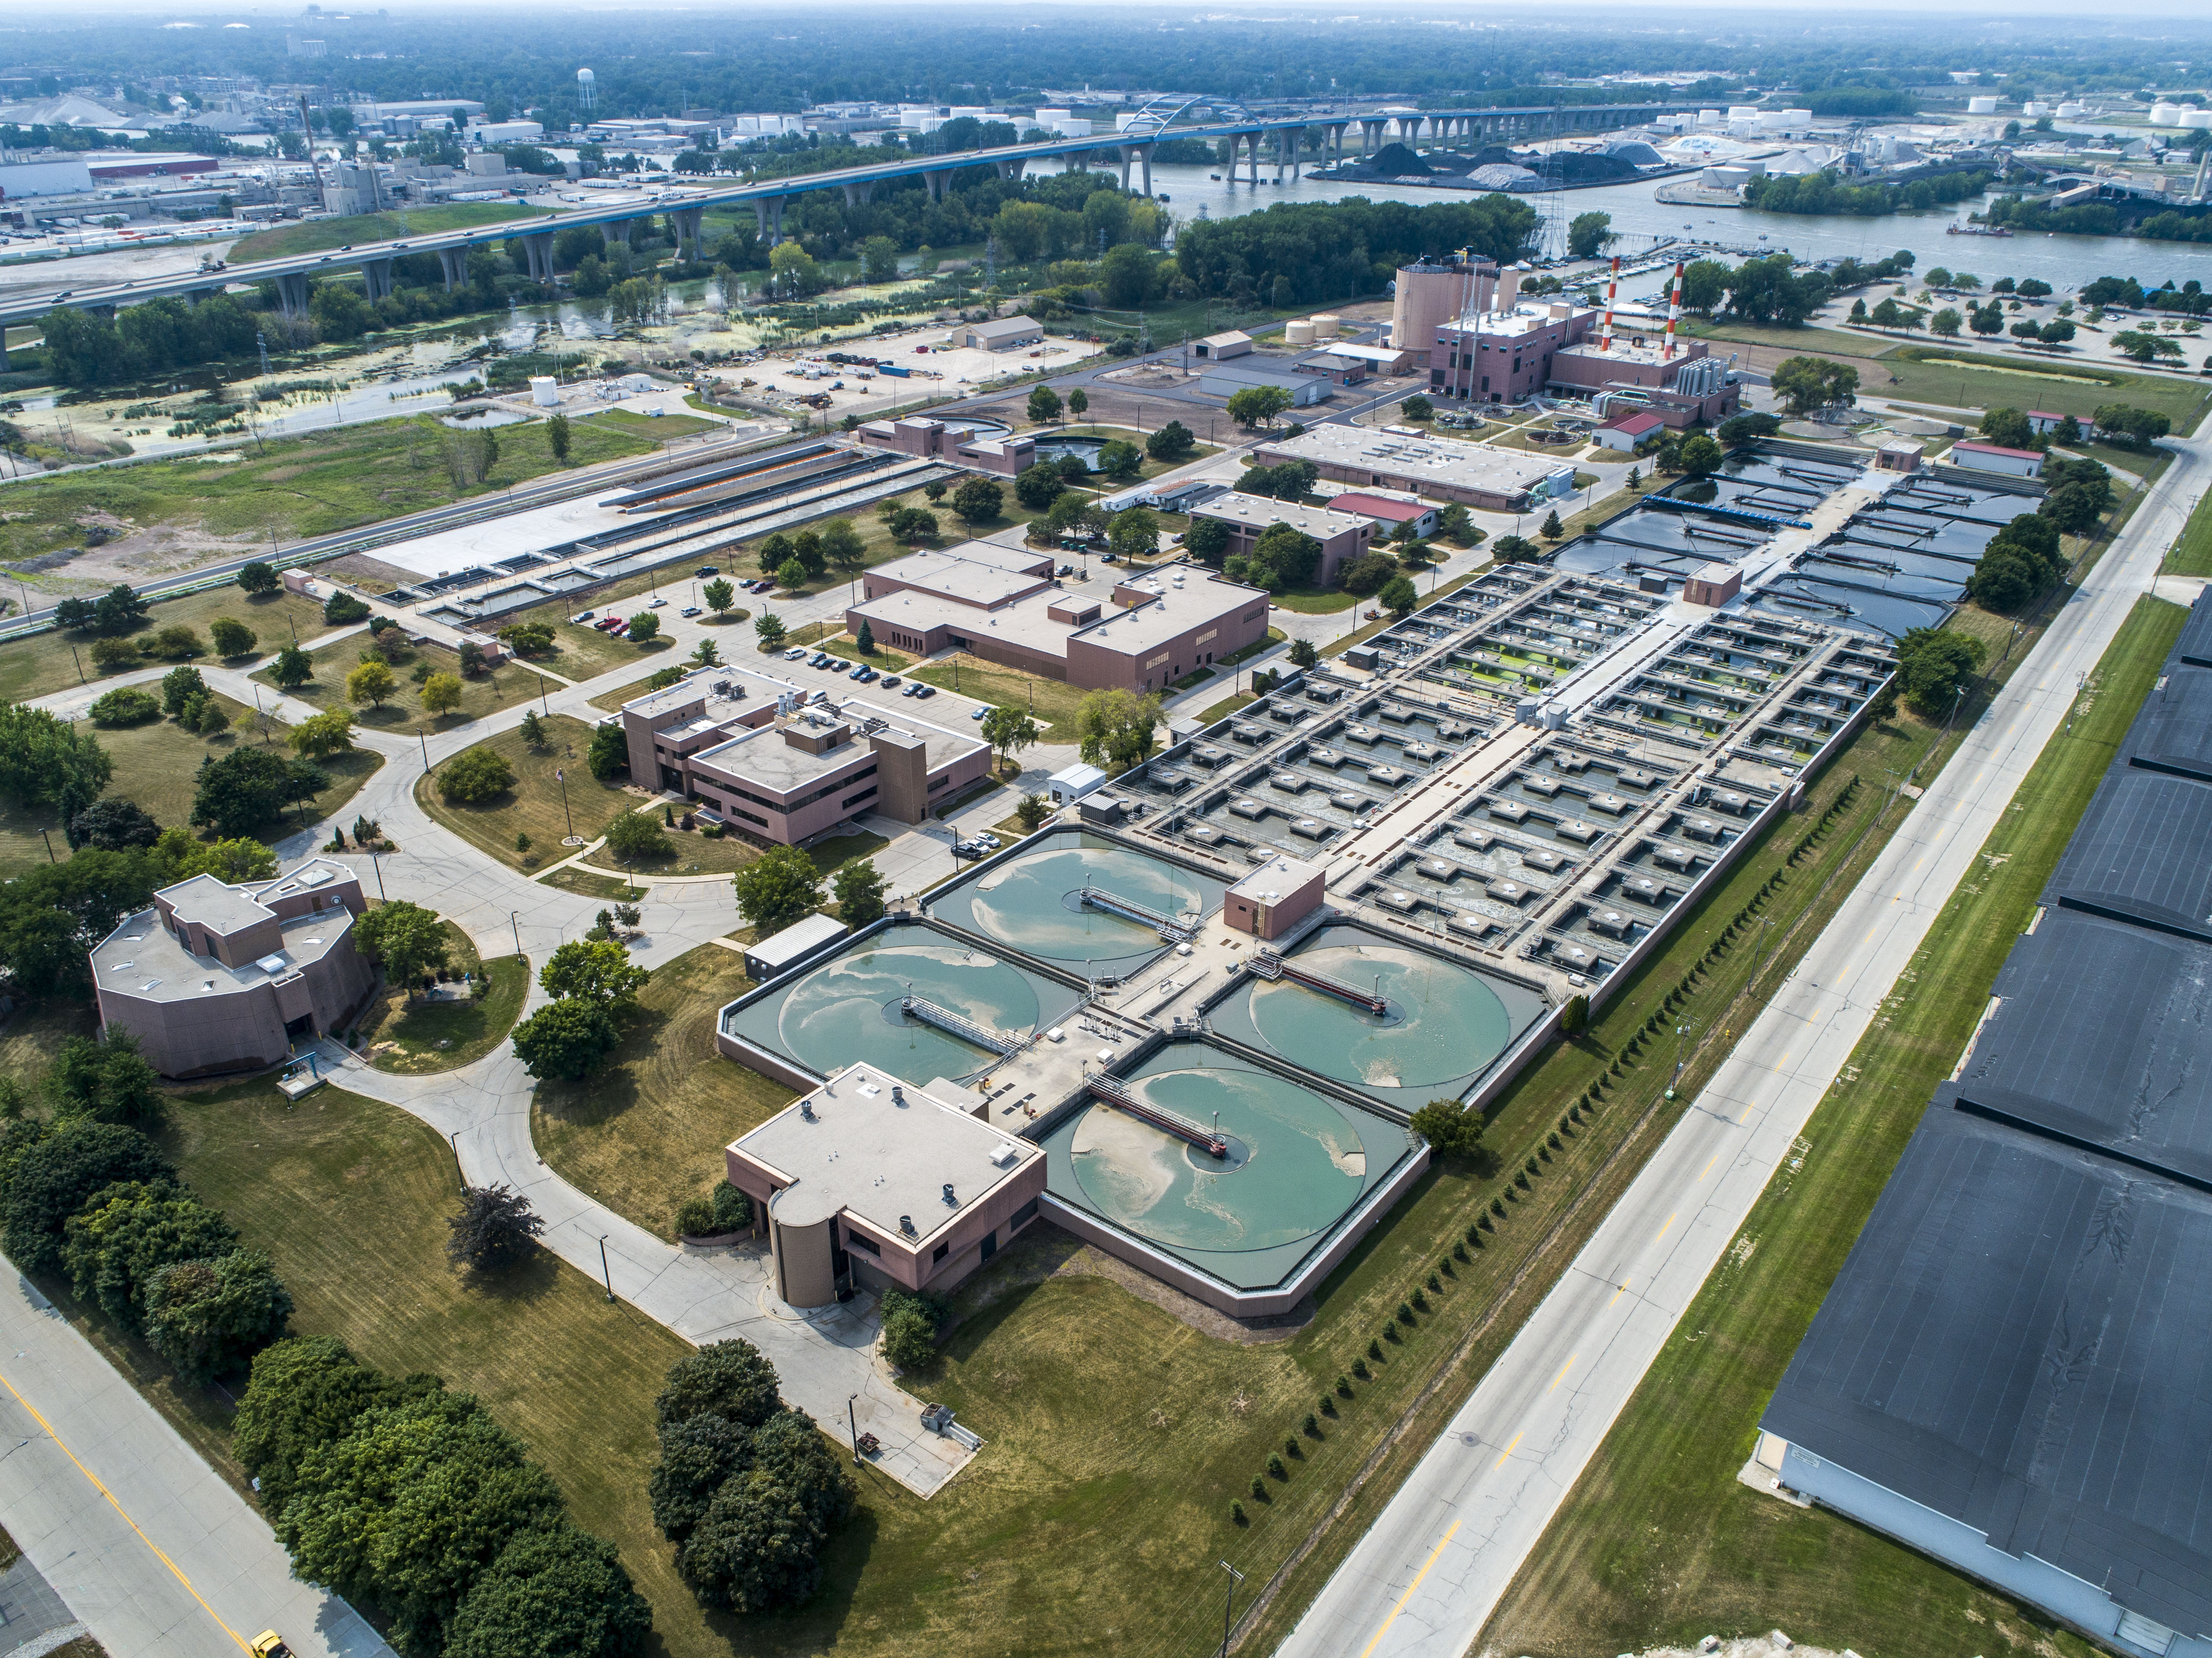 Aerial view of NEW Water's Green Bay Facility